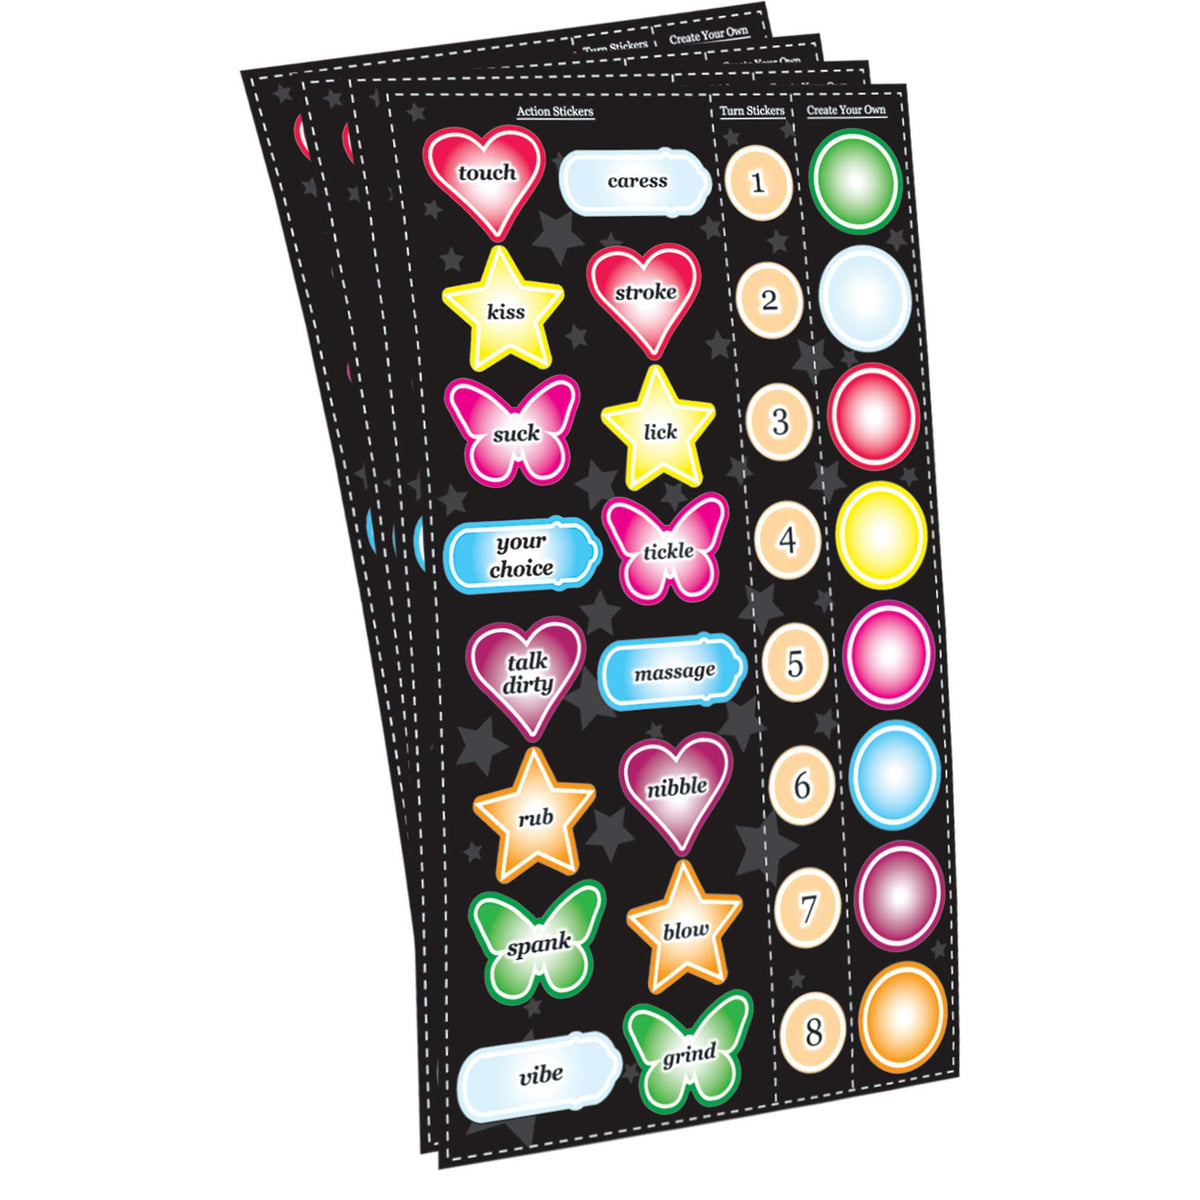 Foreplay Your Way - The Sexy Sticker Game for Couples